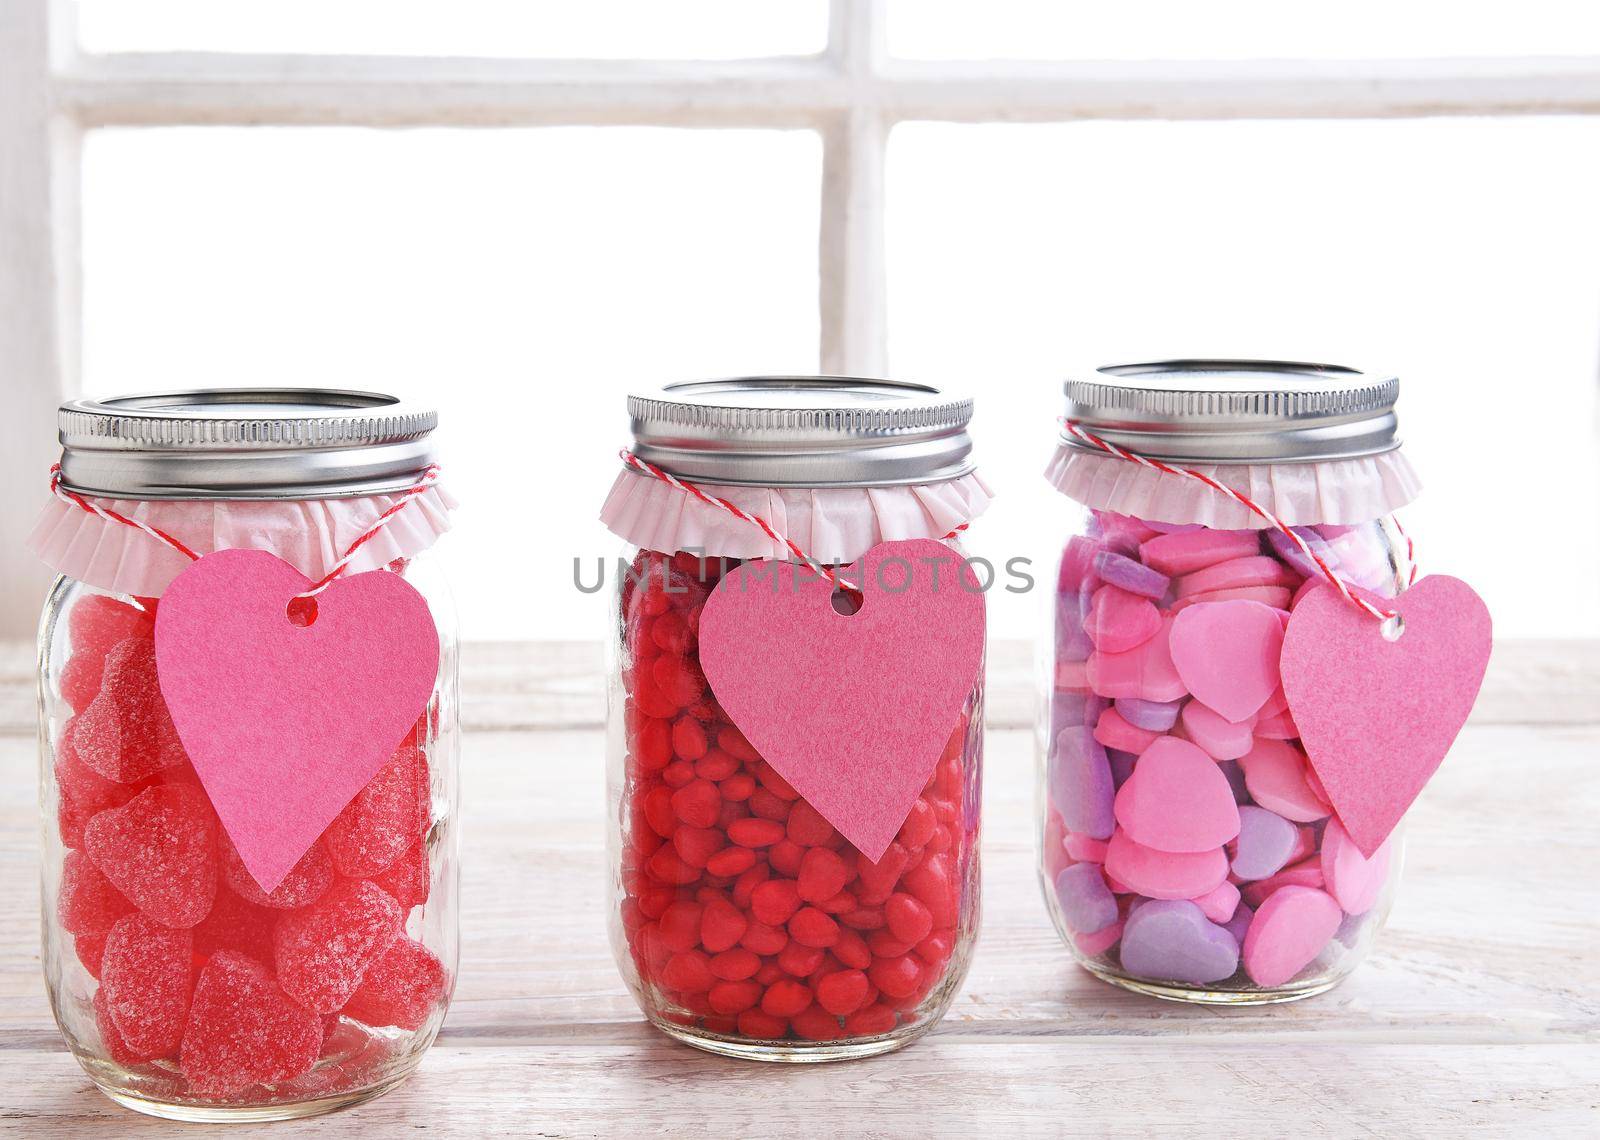 Canning jars filled with candy hearts and decorated for Valentine's Day with a heart shaped gift tag. 